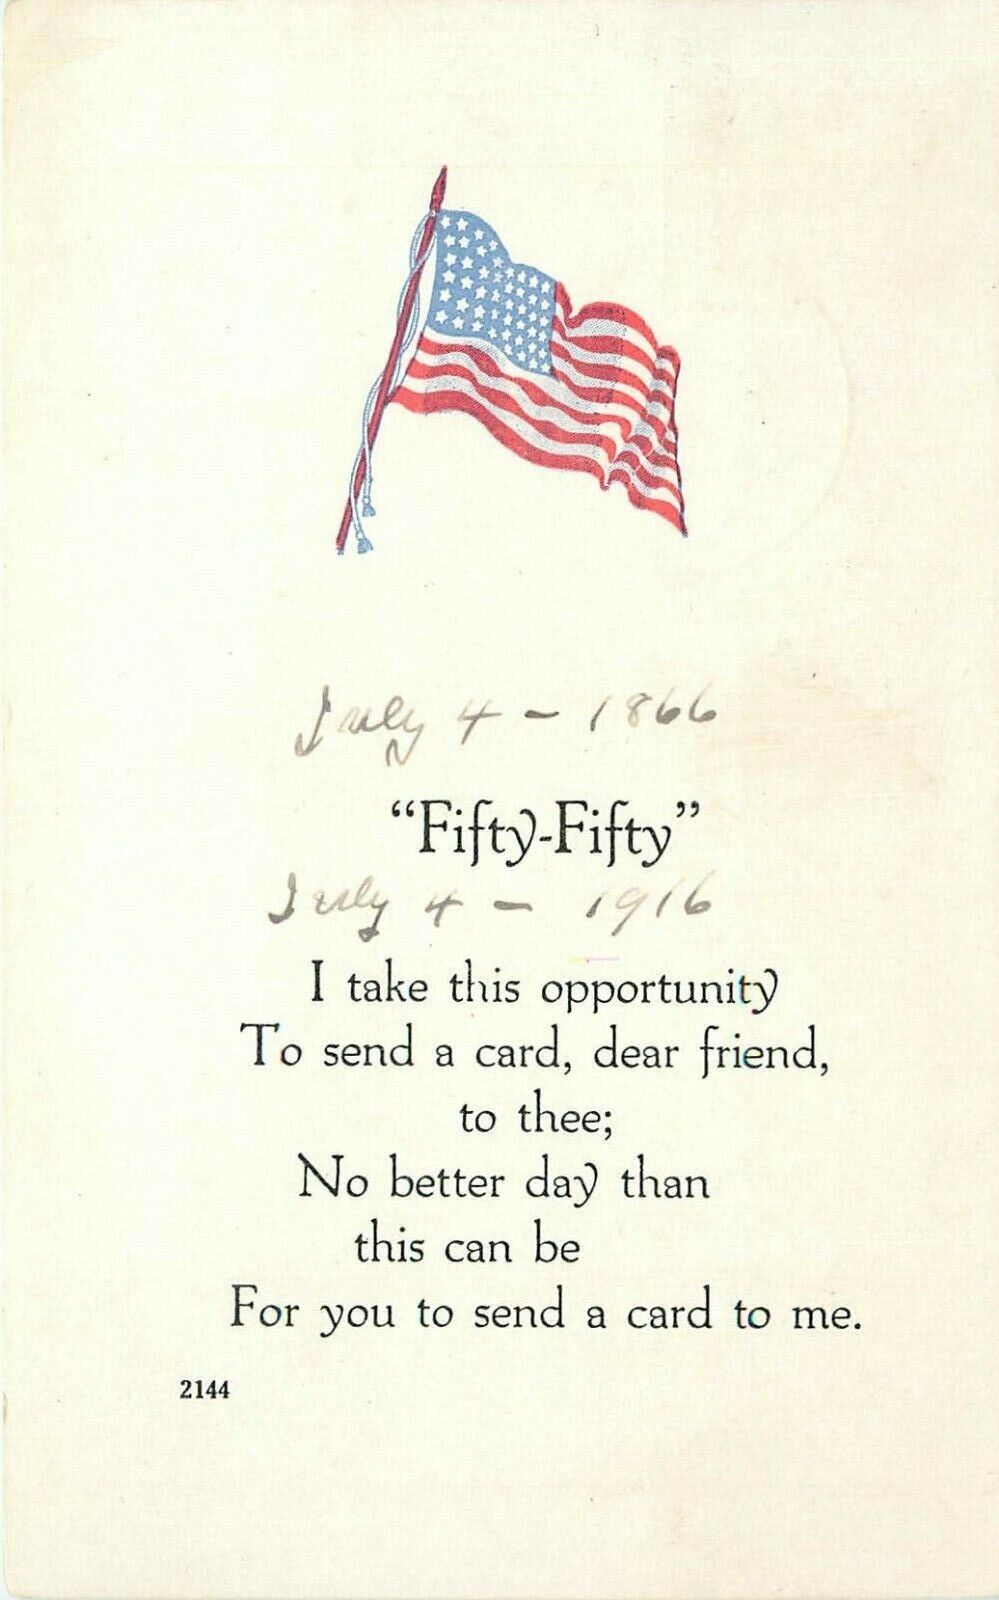 Fifty Fifty Poem United States Flag July 4th Indepence Day pm pm 1916 Postcard